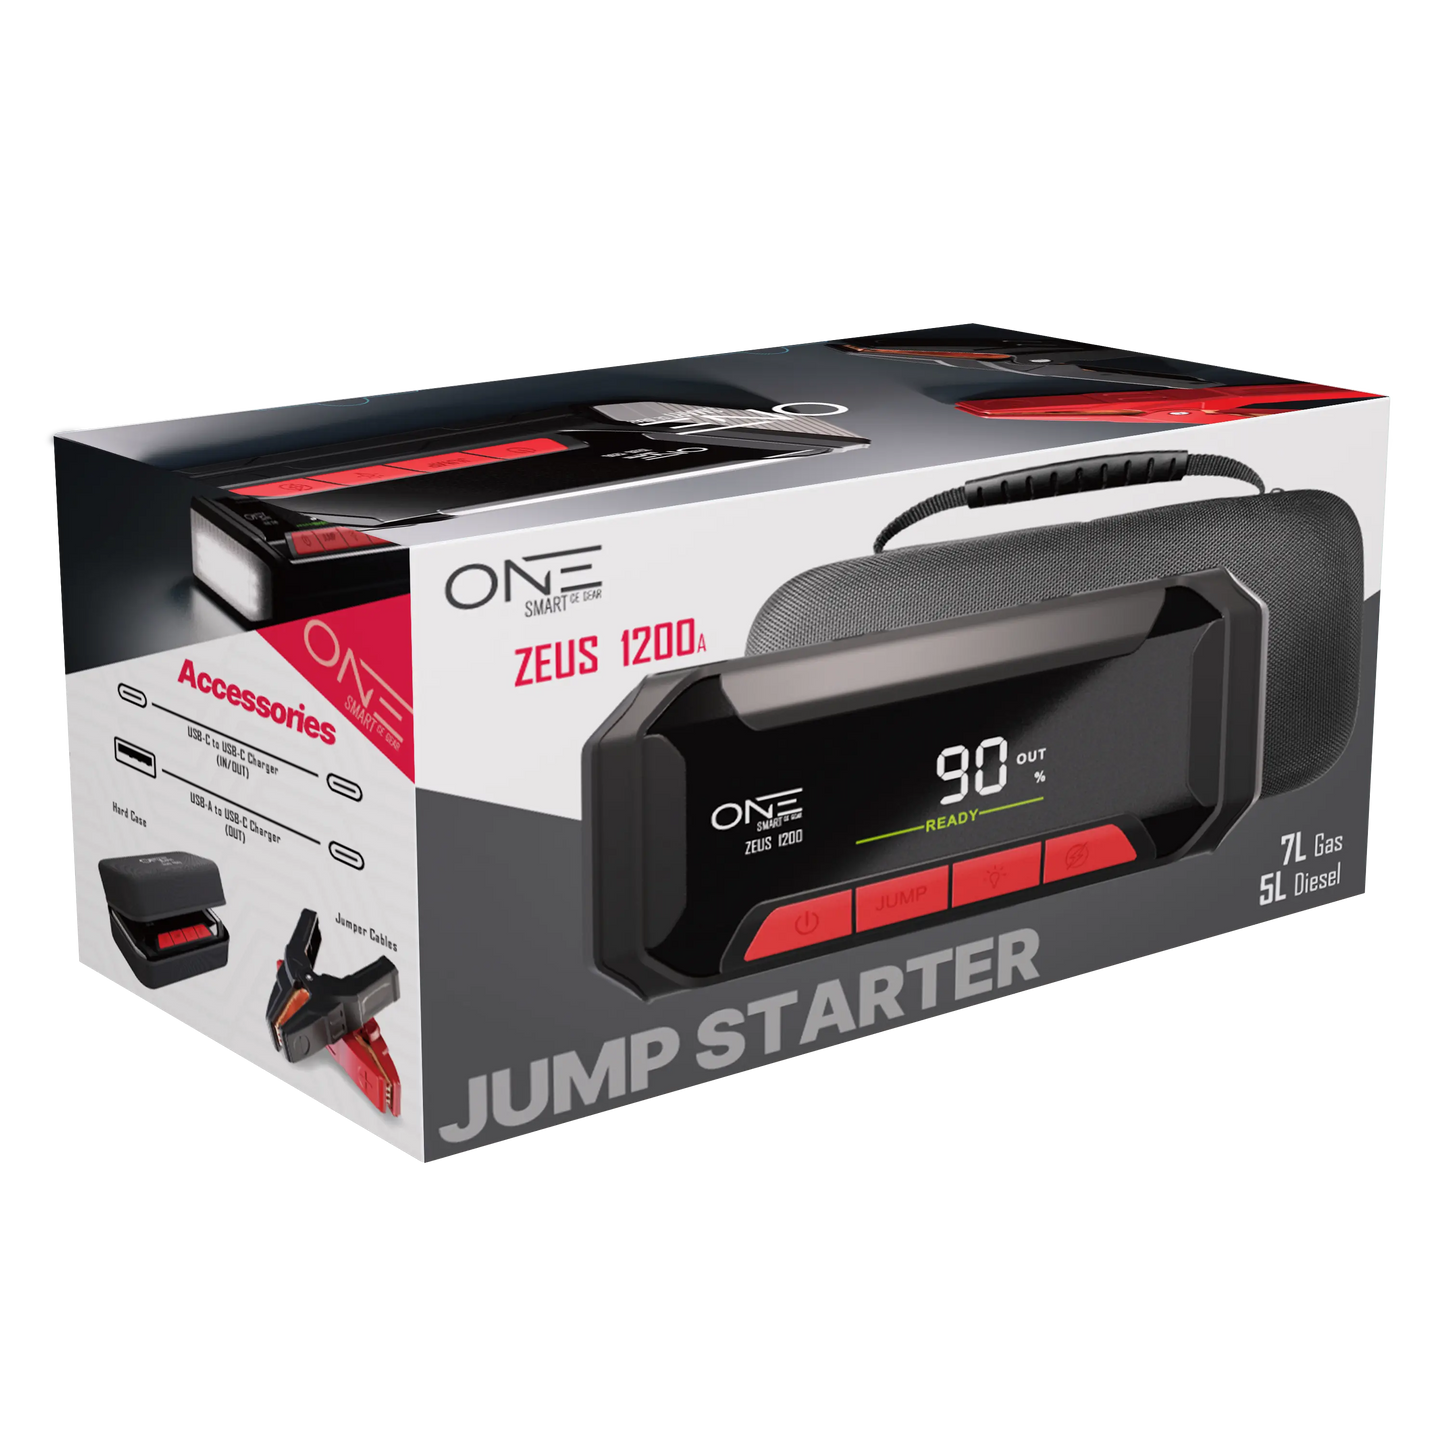 ONE Jump Starter 1200A Peak Battery Pack, Ultrasafe Car Battery Jumpstarter, 12V Jump Box for Battery up to 7L Gas or 5L Diesel Engine, Battery Booster 65W Fast Charger, Portable Hard Case/Dust Tight